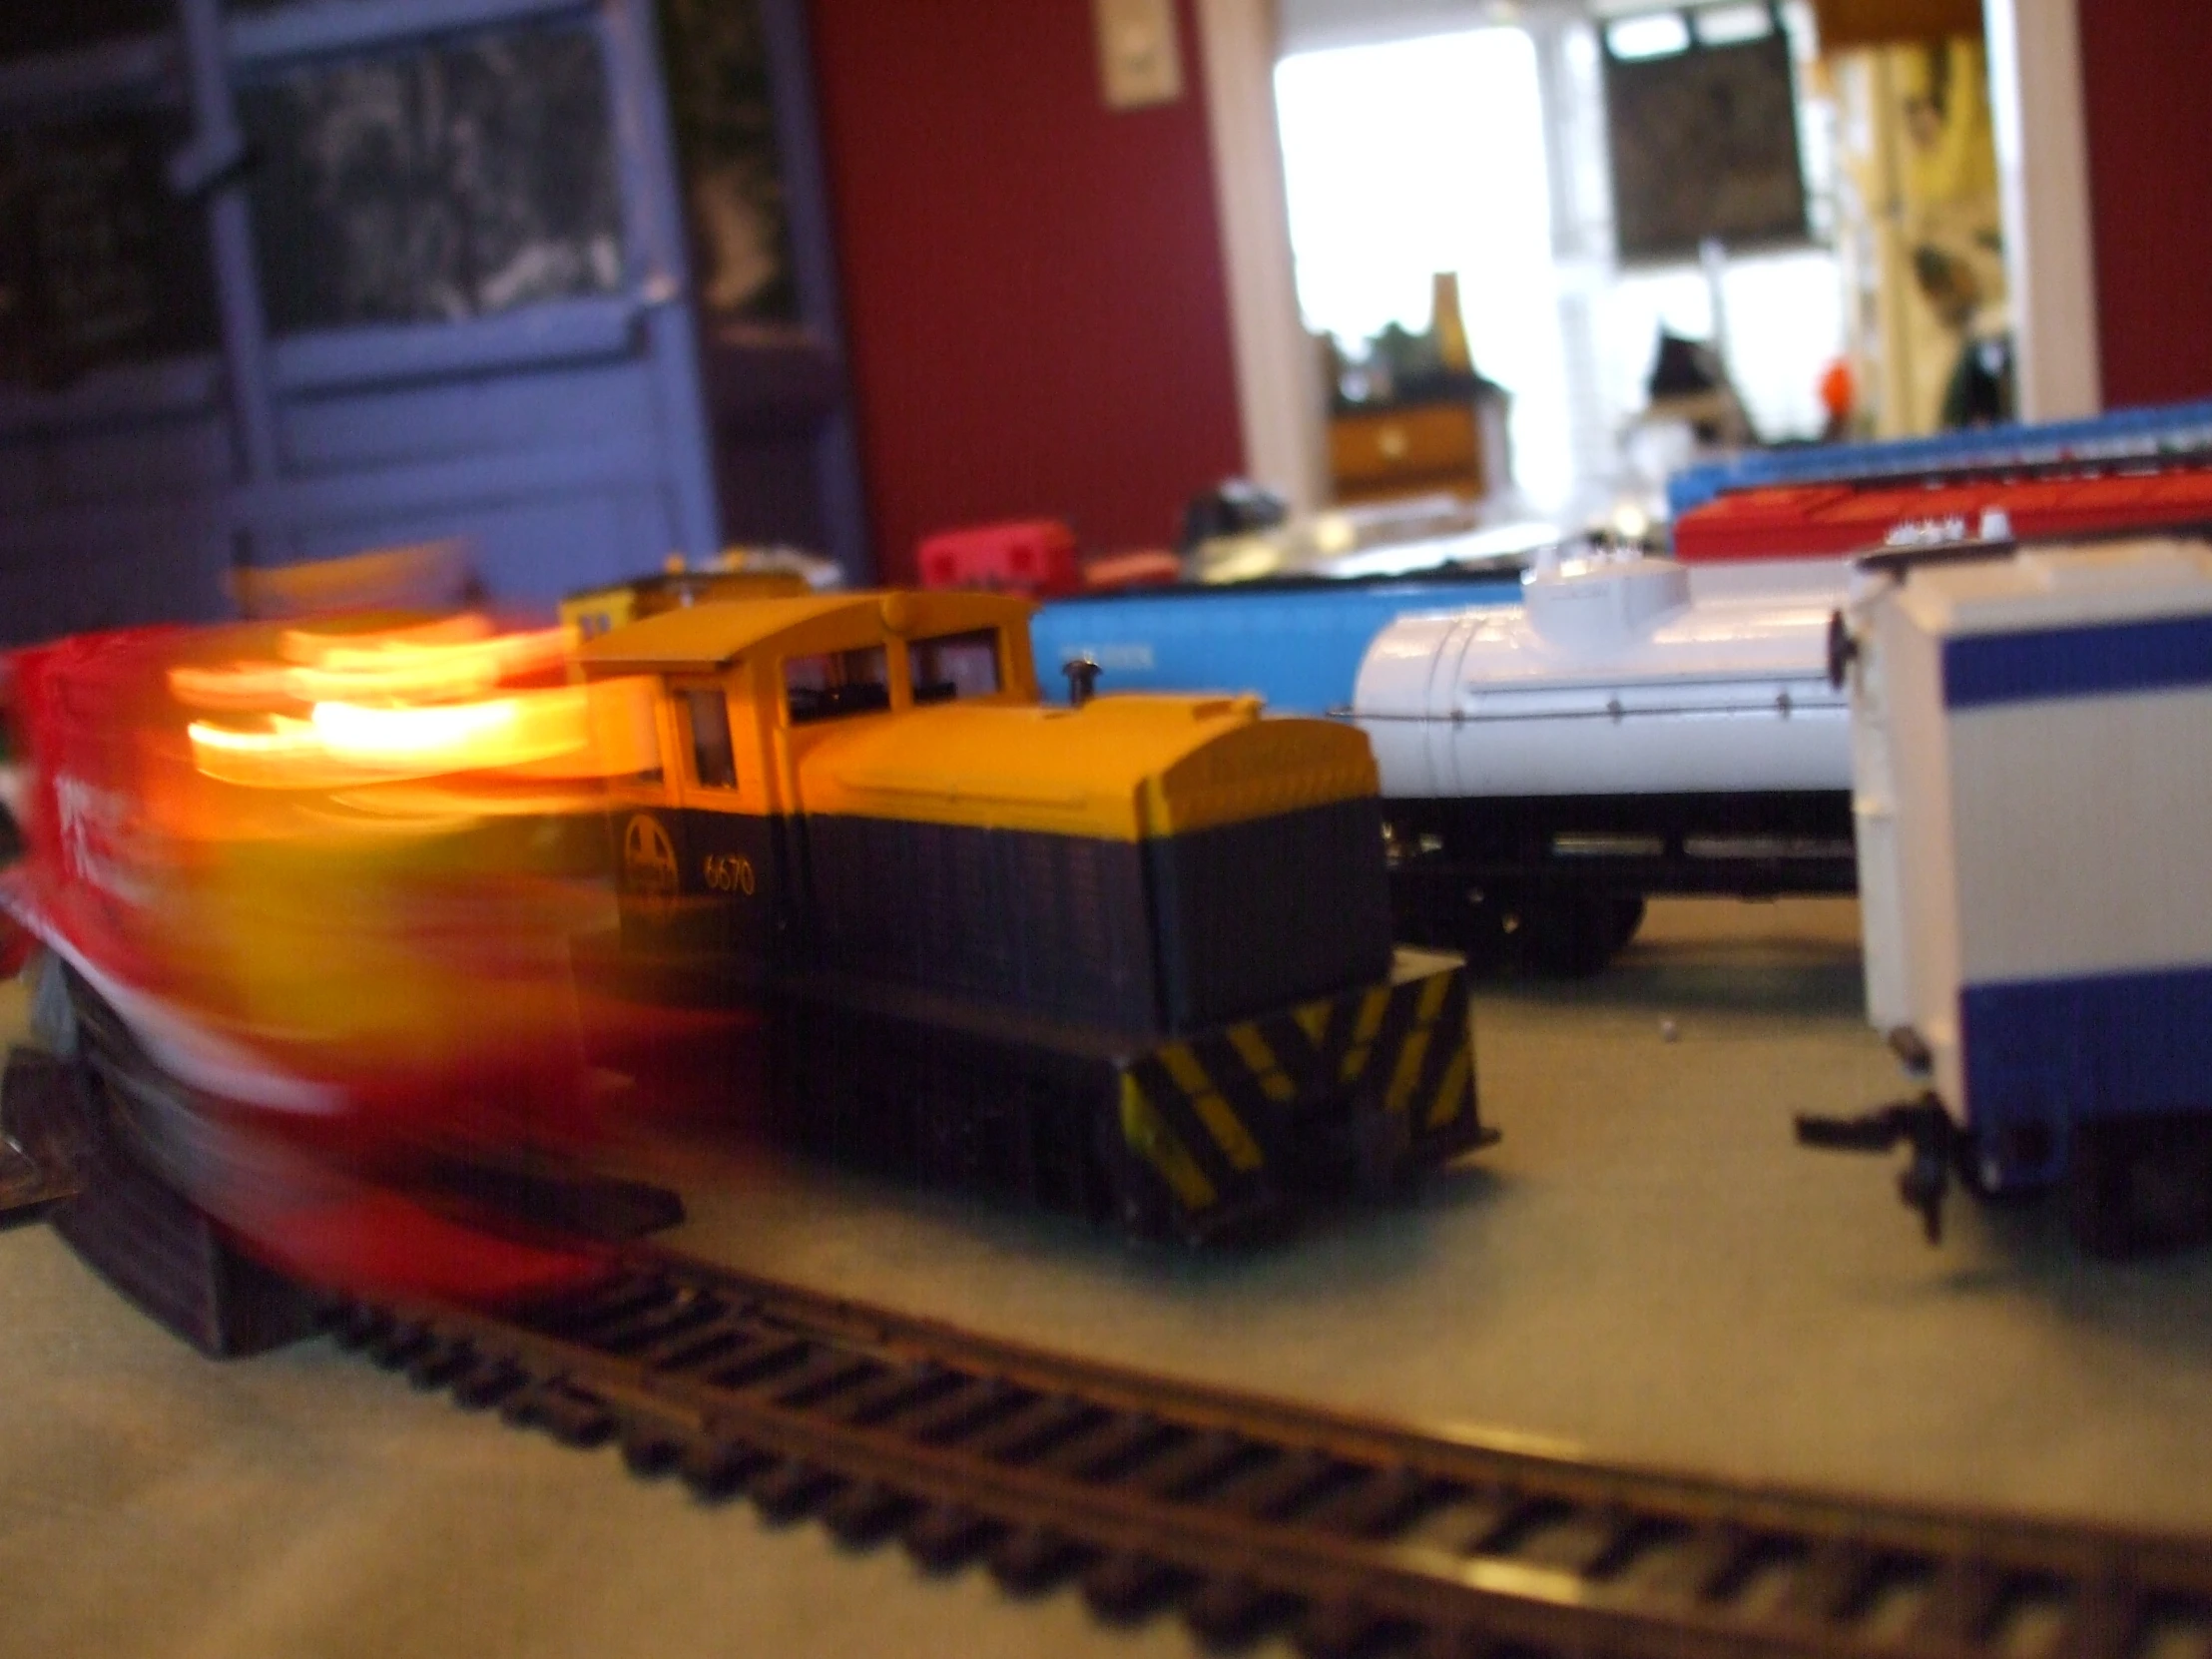 small toy trains on track during the day